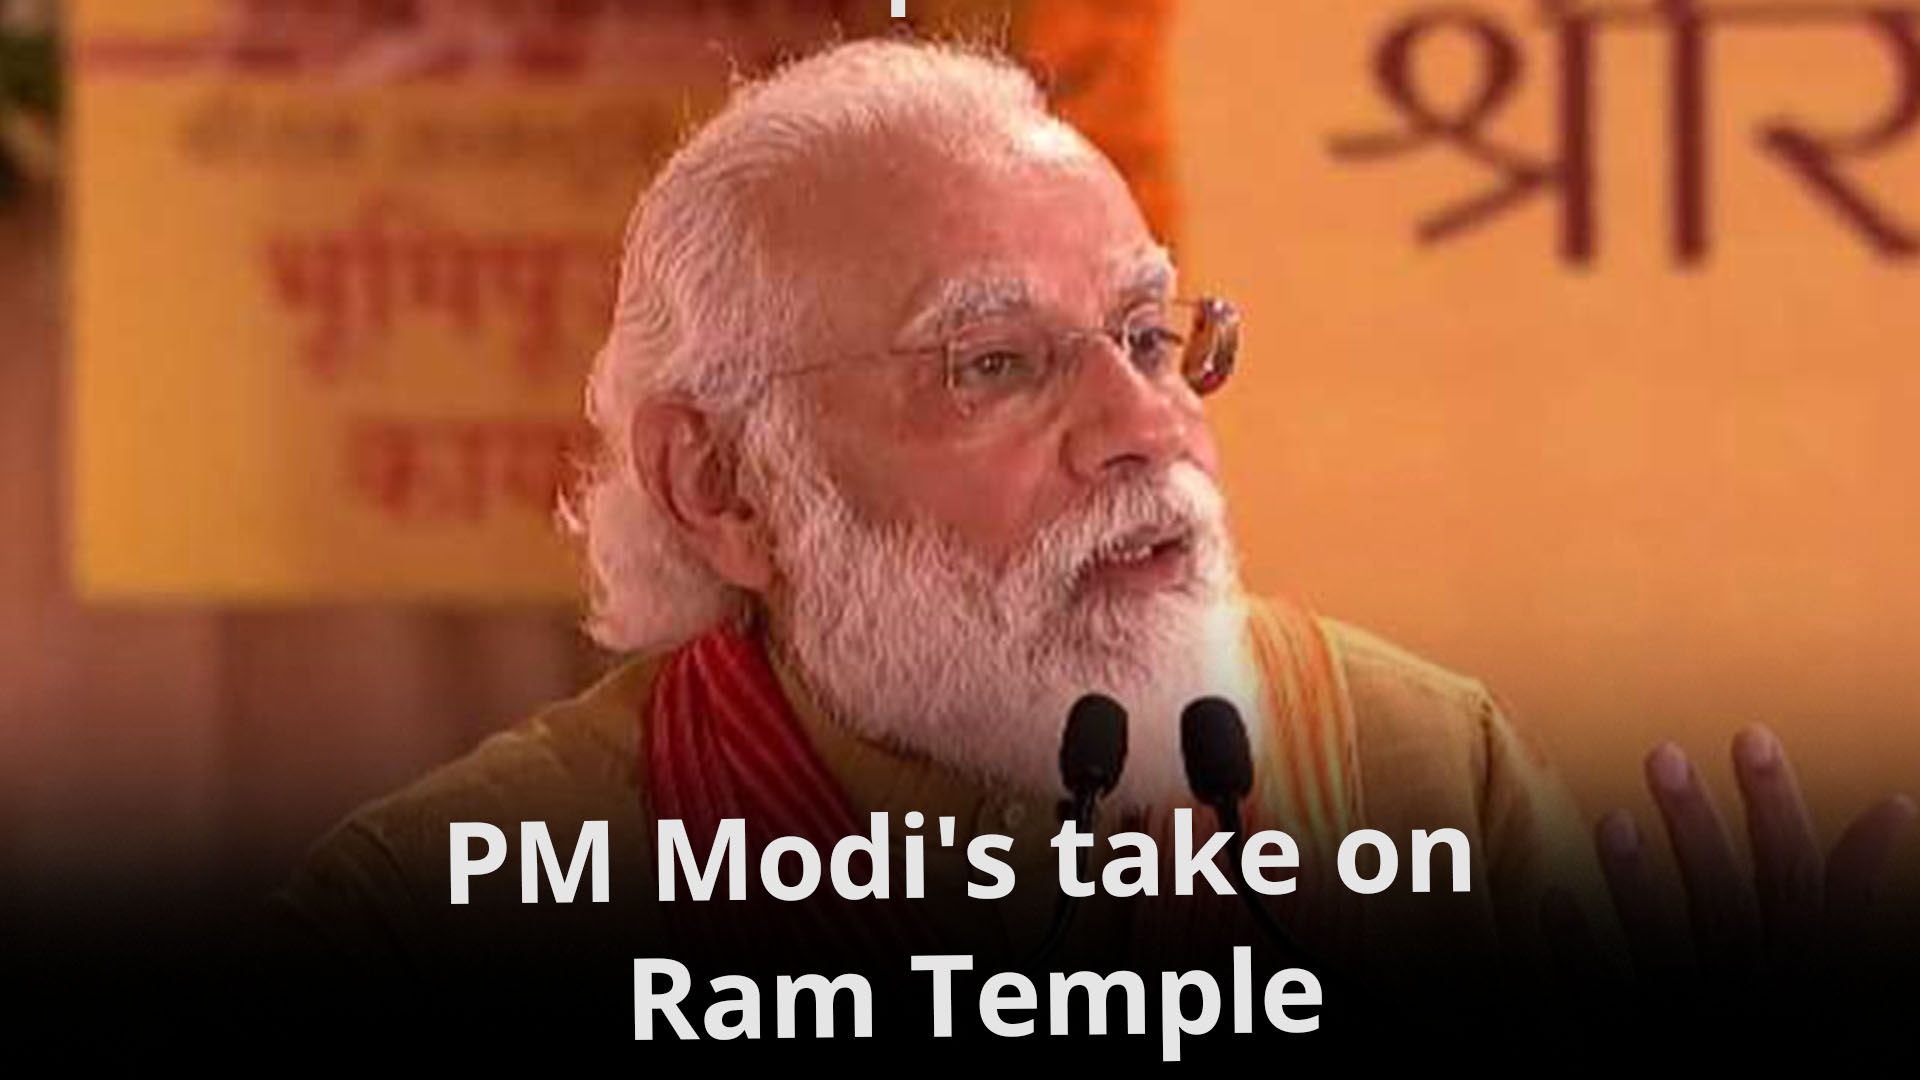 Ram temple to be symbol of faith, nationalism, says PM Modi